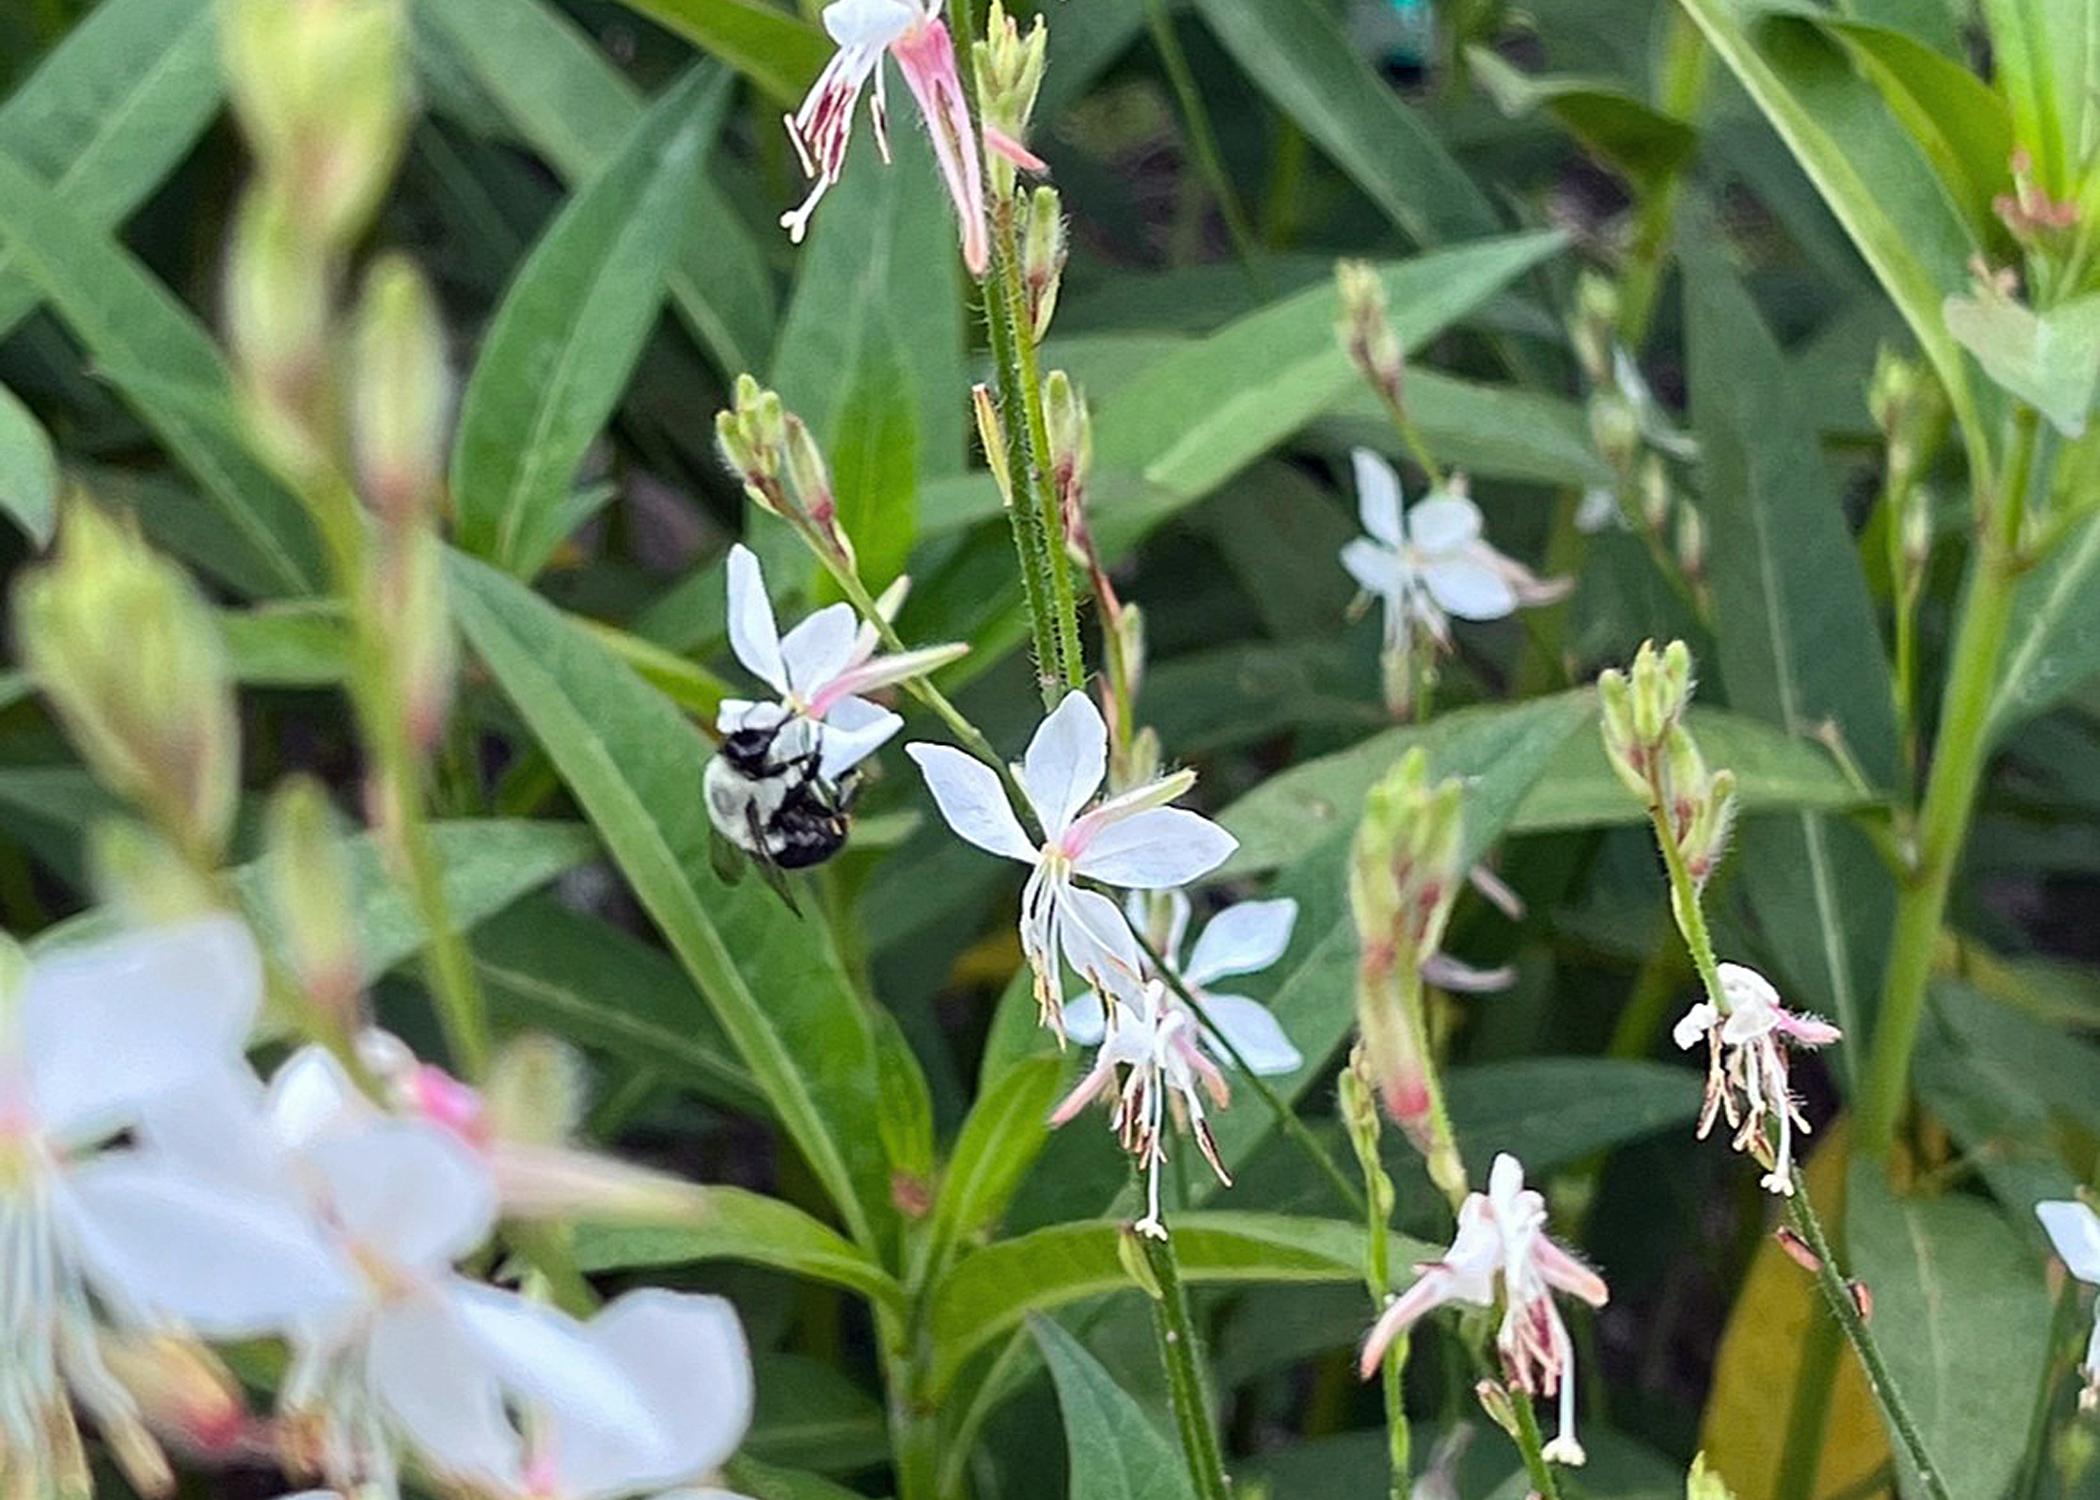 A bee hangs onto a slender stem that has white flowers.